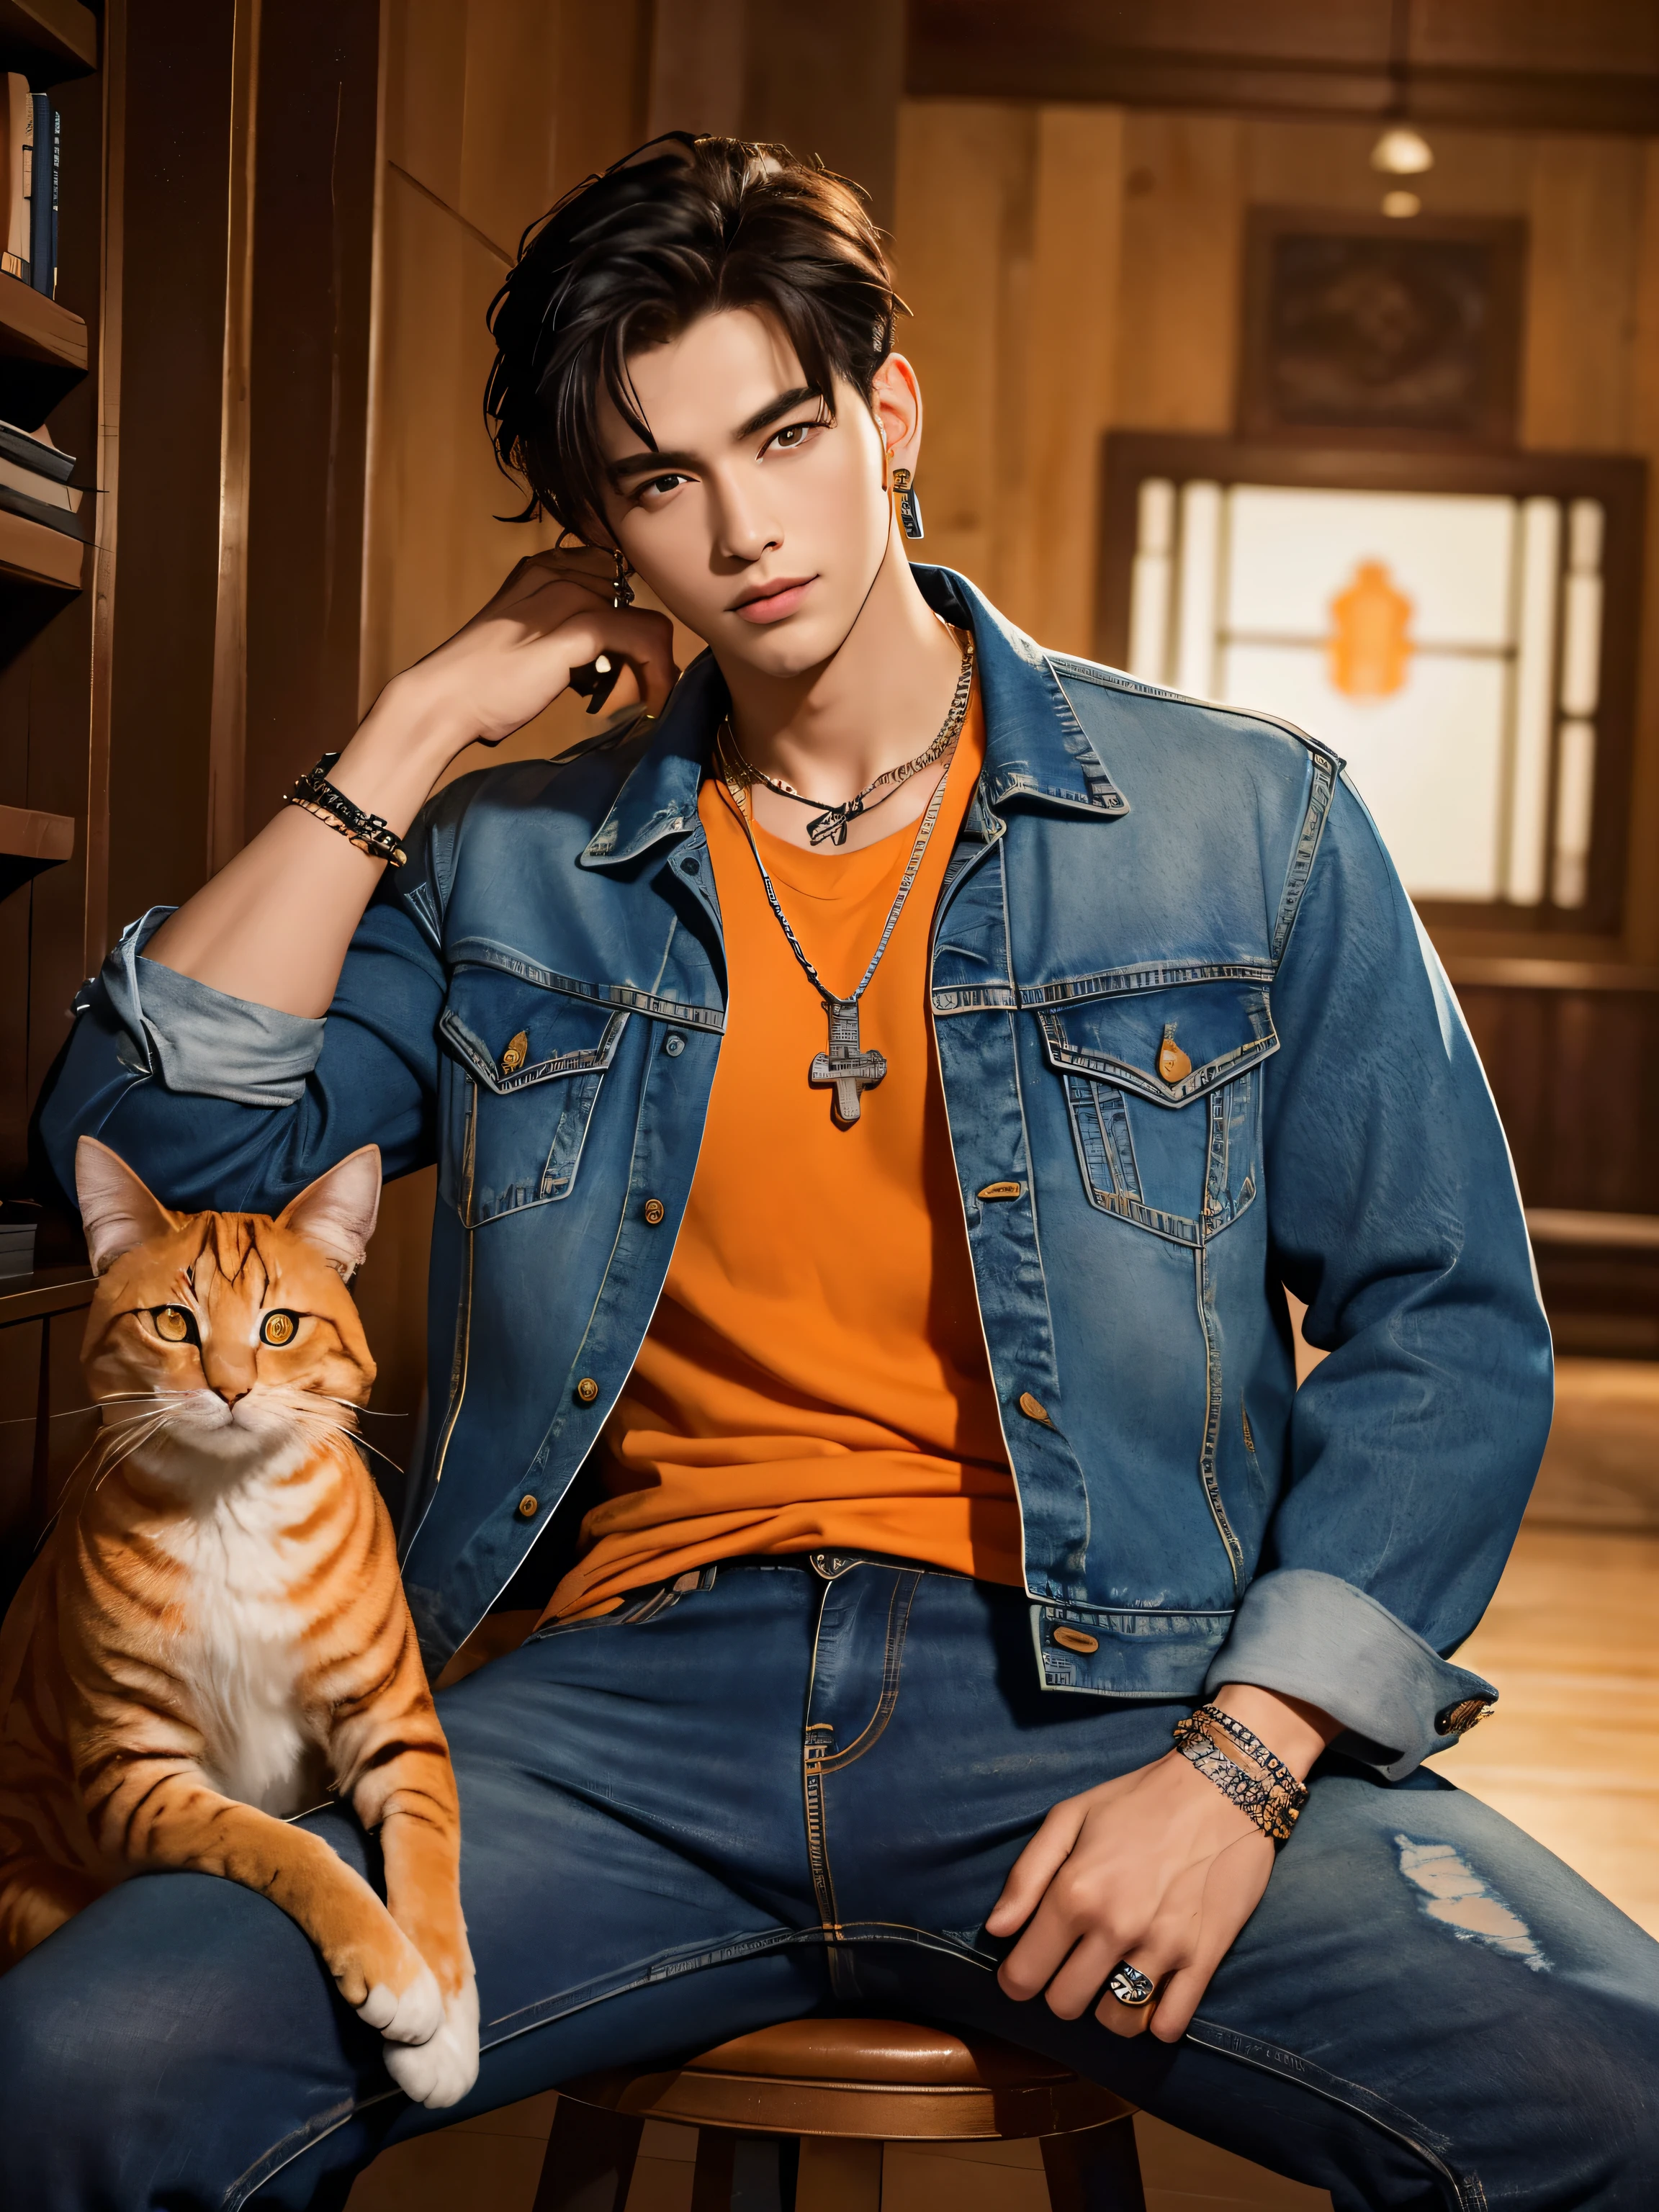 Masterpiece, complicated details, (((handsome young boyอายุ 30 ปี))), rocker denim jacket, Jeans, leather bracelet, wire necklace, big earrings, Araffi and an orange cat sat on a man&#39;s lap., Inspiration from Zhang Han, Inspired by Adam Dario Kiel, Who is Xi Wu?, realistic. Cheng Yi, Inspiration from Yan Juncheng, Handsome face and beautiful face, Inspired by Kim Hwan Ki, Inspiration from Kim Eung Hwan, Yanjun Chengt, Cai Su Kun, Inspiration from Zhou ChenMasterpiece, complicated details, handsome young boy, rocker denim jacket, Jeans, leather bracelet, wire necklace, big earrings, Posing against the mirror, Black hair, big black eyes, holding an orange cat. มีorange tabby catMasterpiece, complicated details, ((handsome young boy holding an orange cat)), rocker denim jacket, Jeans, leather bracelet, wire necklace, big earrings, Black hair, big black eyes, orange shirt, holding an orange cat, Araffi and a white cat sitting on a man&#39;s lap., Inspiration from Zhang Han, Inspired by Adam Dario Kiel, Who is Xi Wu?, realistic. Cheng Yi, Inspiration from Yan Juncheng, Handsome face and beautiful face, Inspired by Kim Hwan Ki, Inspiration from Kim Eung Hwan, Yanjun Chengt, Cai Su Kun, Inspiration from Zhou ChenMasterpiece, complicated details, handsome young boy, rocker denim jacket, Torn Jeans , leather bracelet, wire necklace, big earrings, Black hair, big black eyes, holding an orange cat. ((orange tabby cat))Masterpiece, complicated details, handsome young boy, (((Rocker Tattered Denim Jacket, Torn Jeans))), leather bracelet, wire necklace, big earrings, Long black hair, big black eyes, orange shirt, holding an orange cat, blackground is sunrise on the green meadow